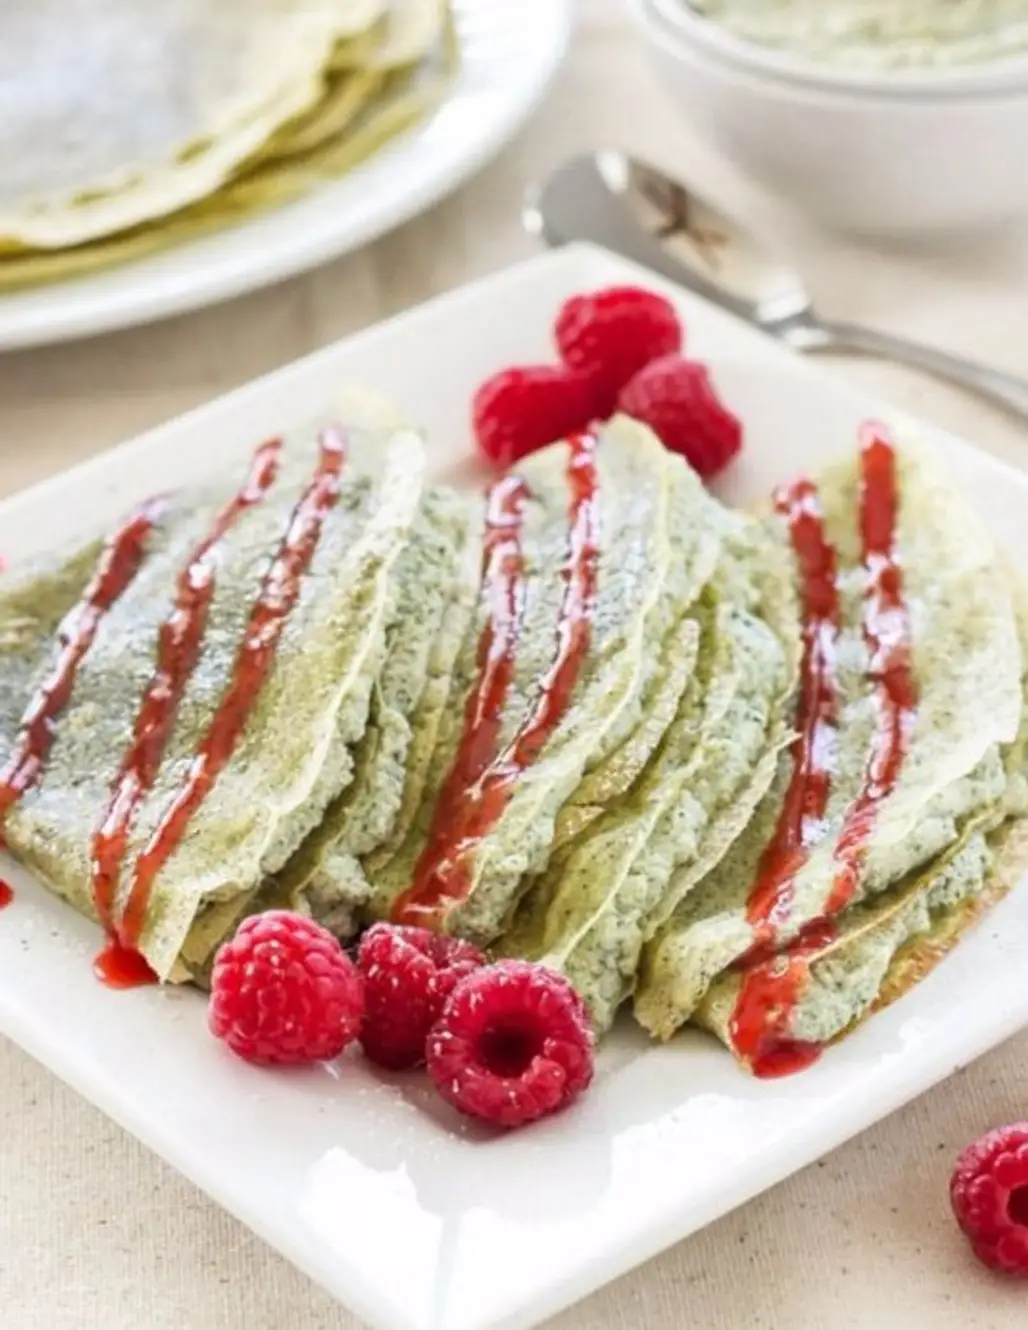 Green Tea Crepes with Matcha Ricotta Filling & Raspberry Sauce